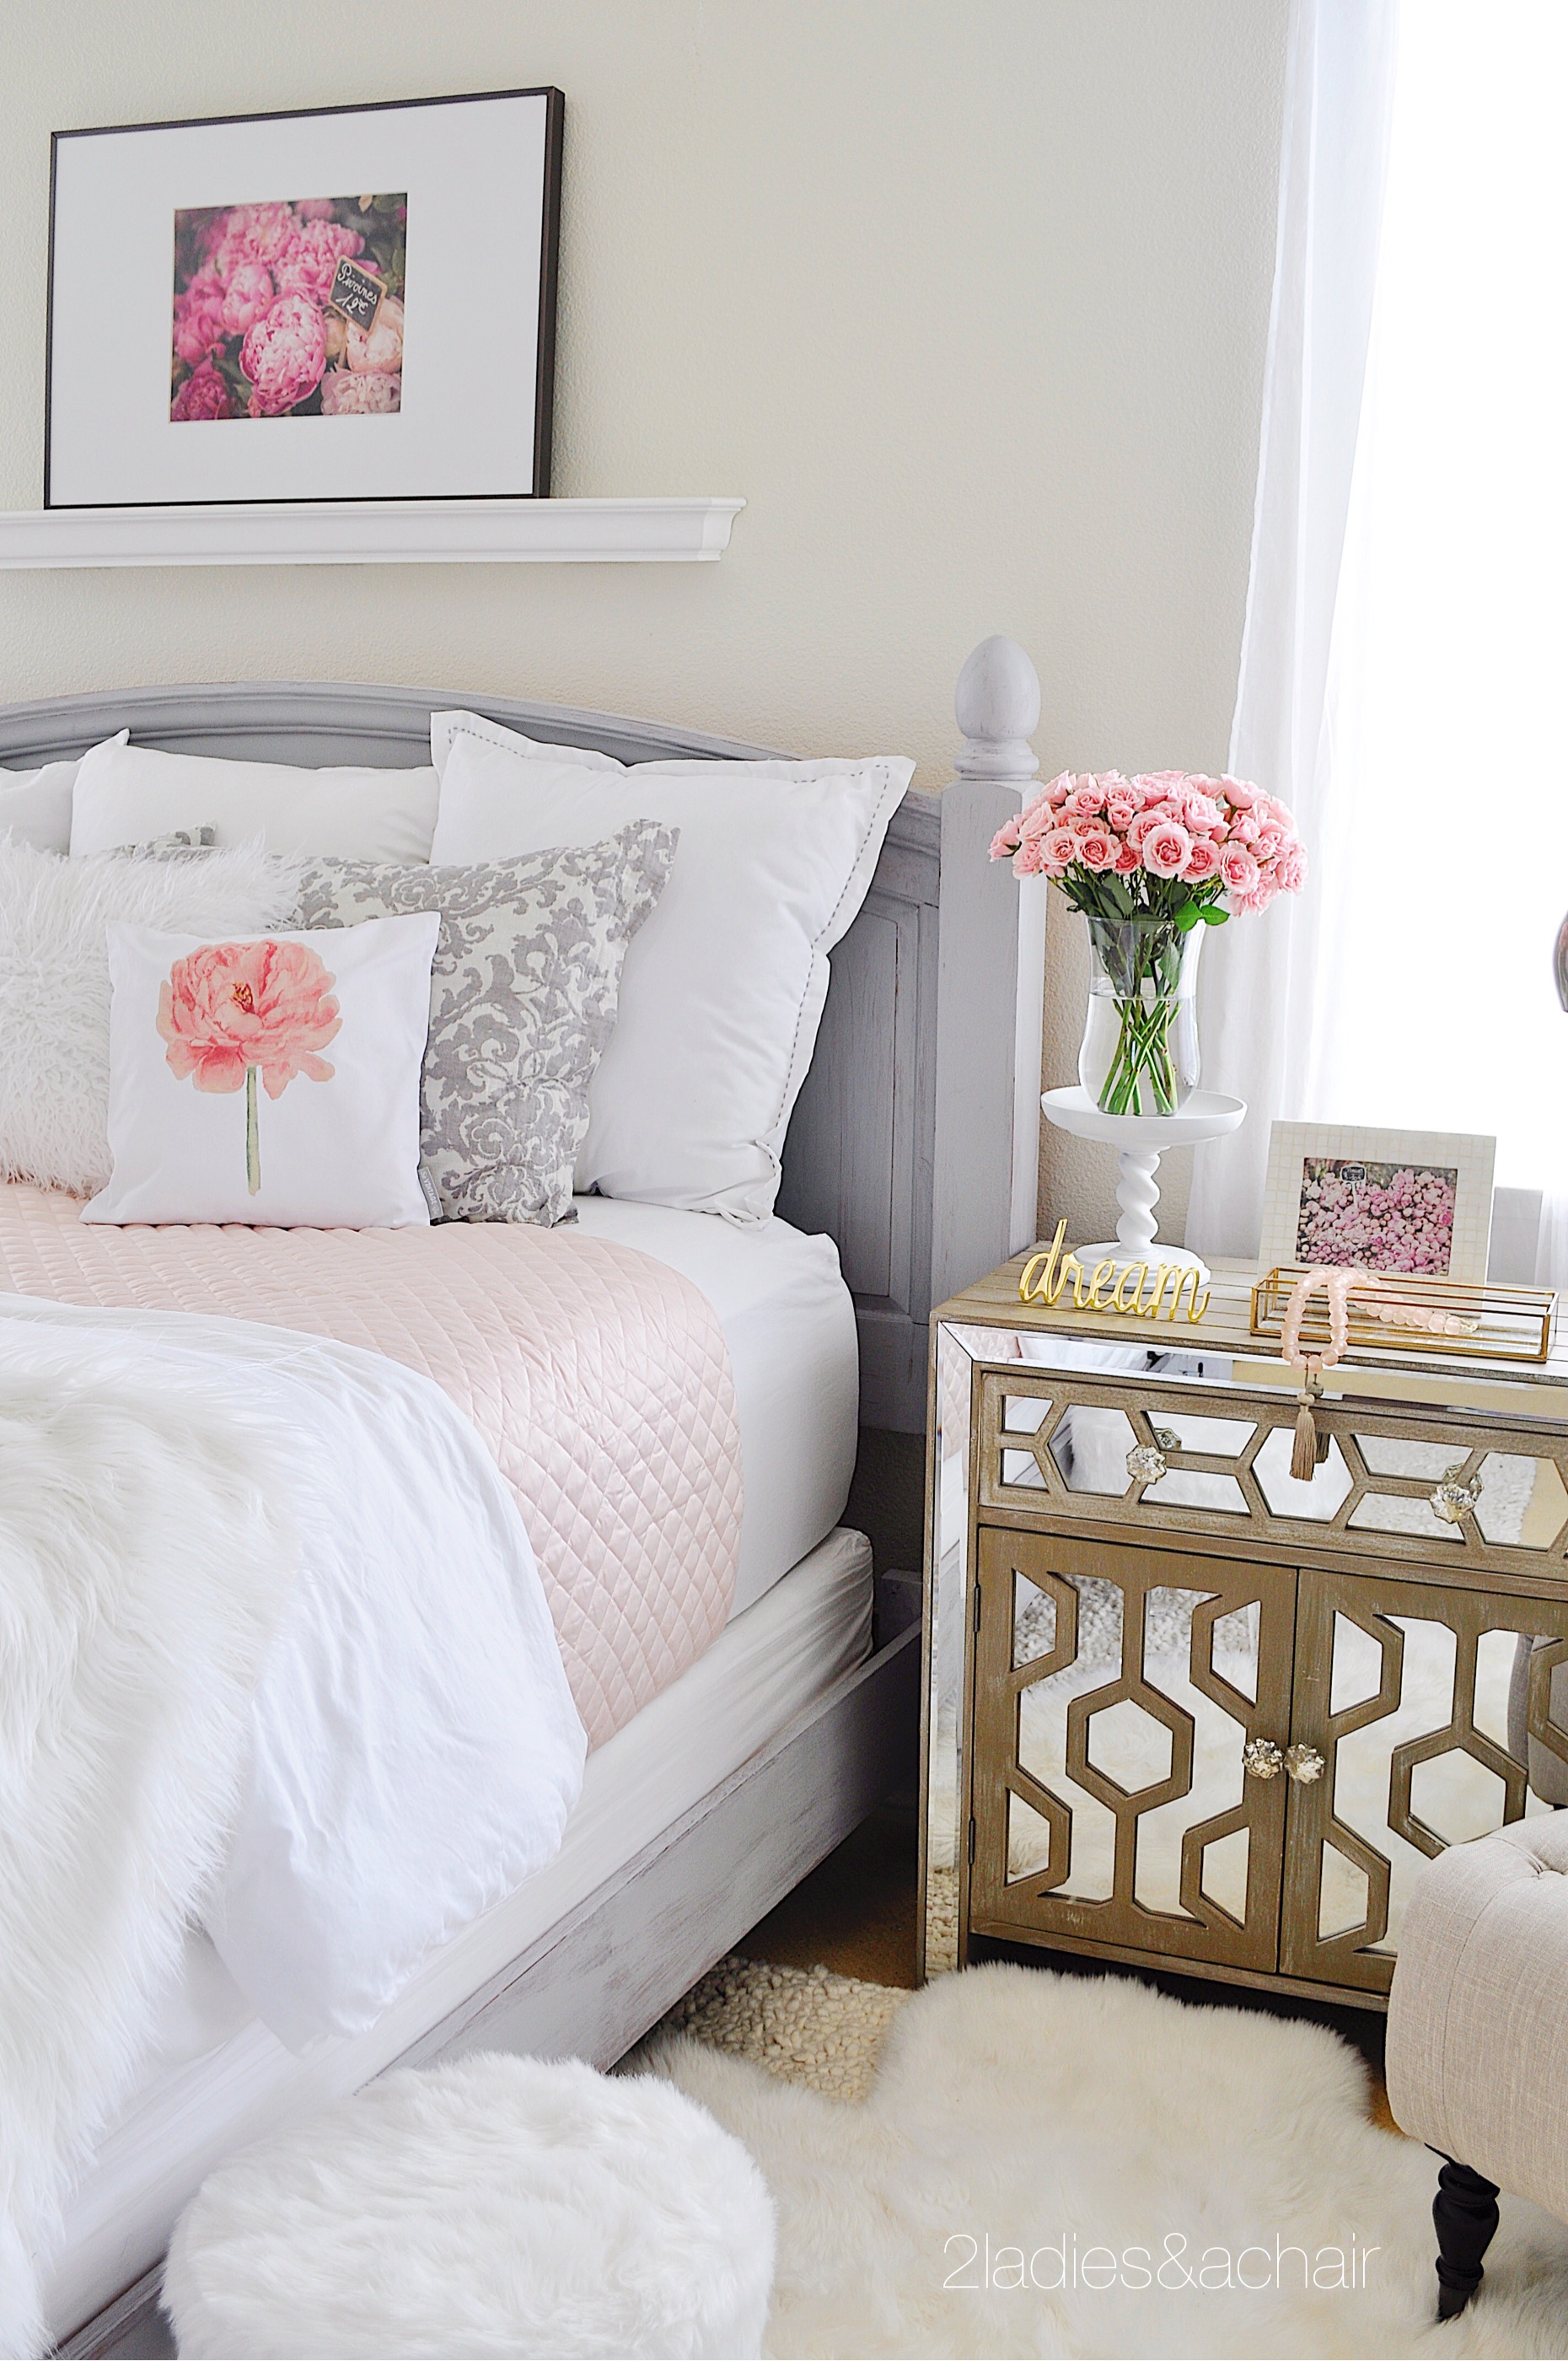 Bedroom Decorating Ideas Before and After — 2 Ladies & A